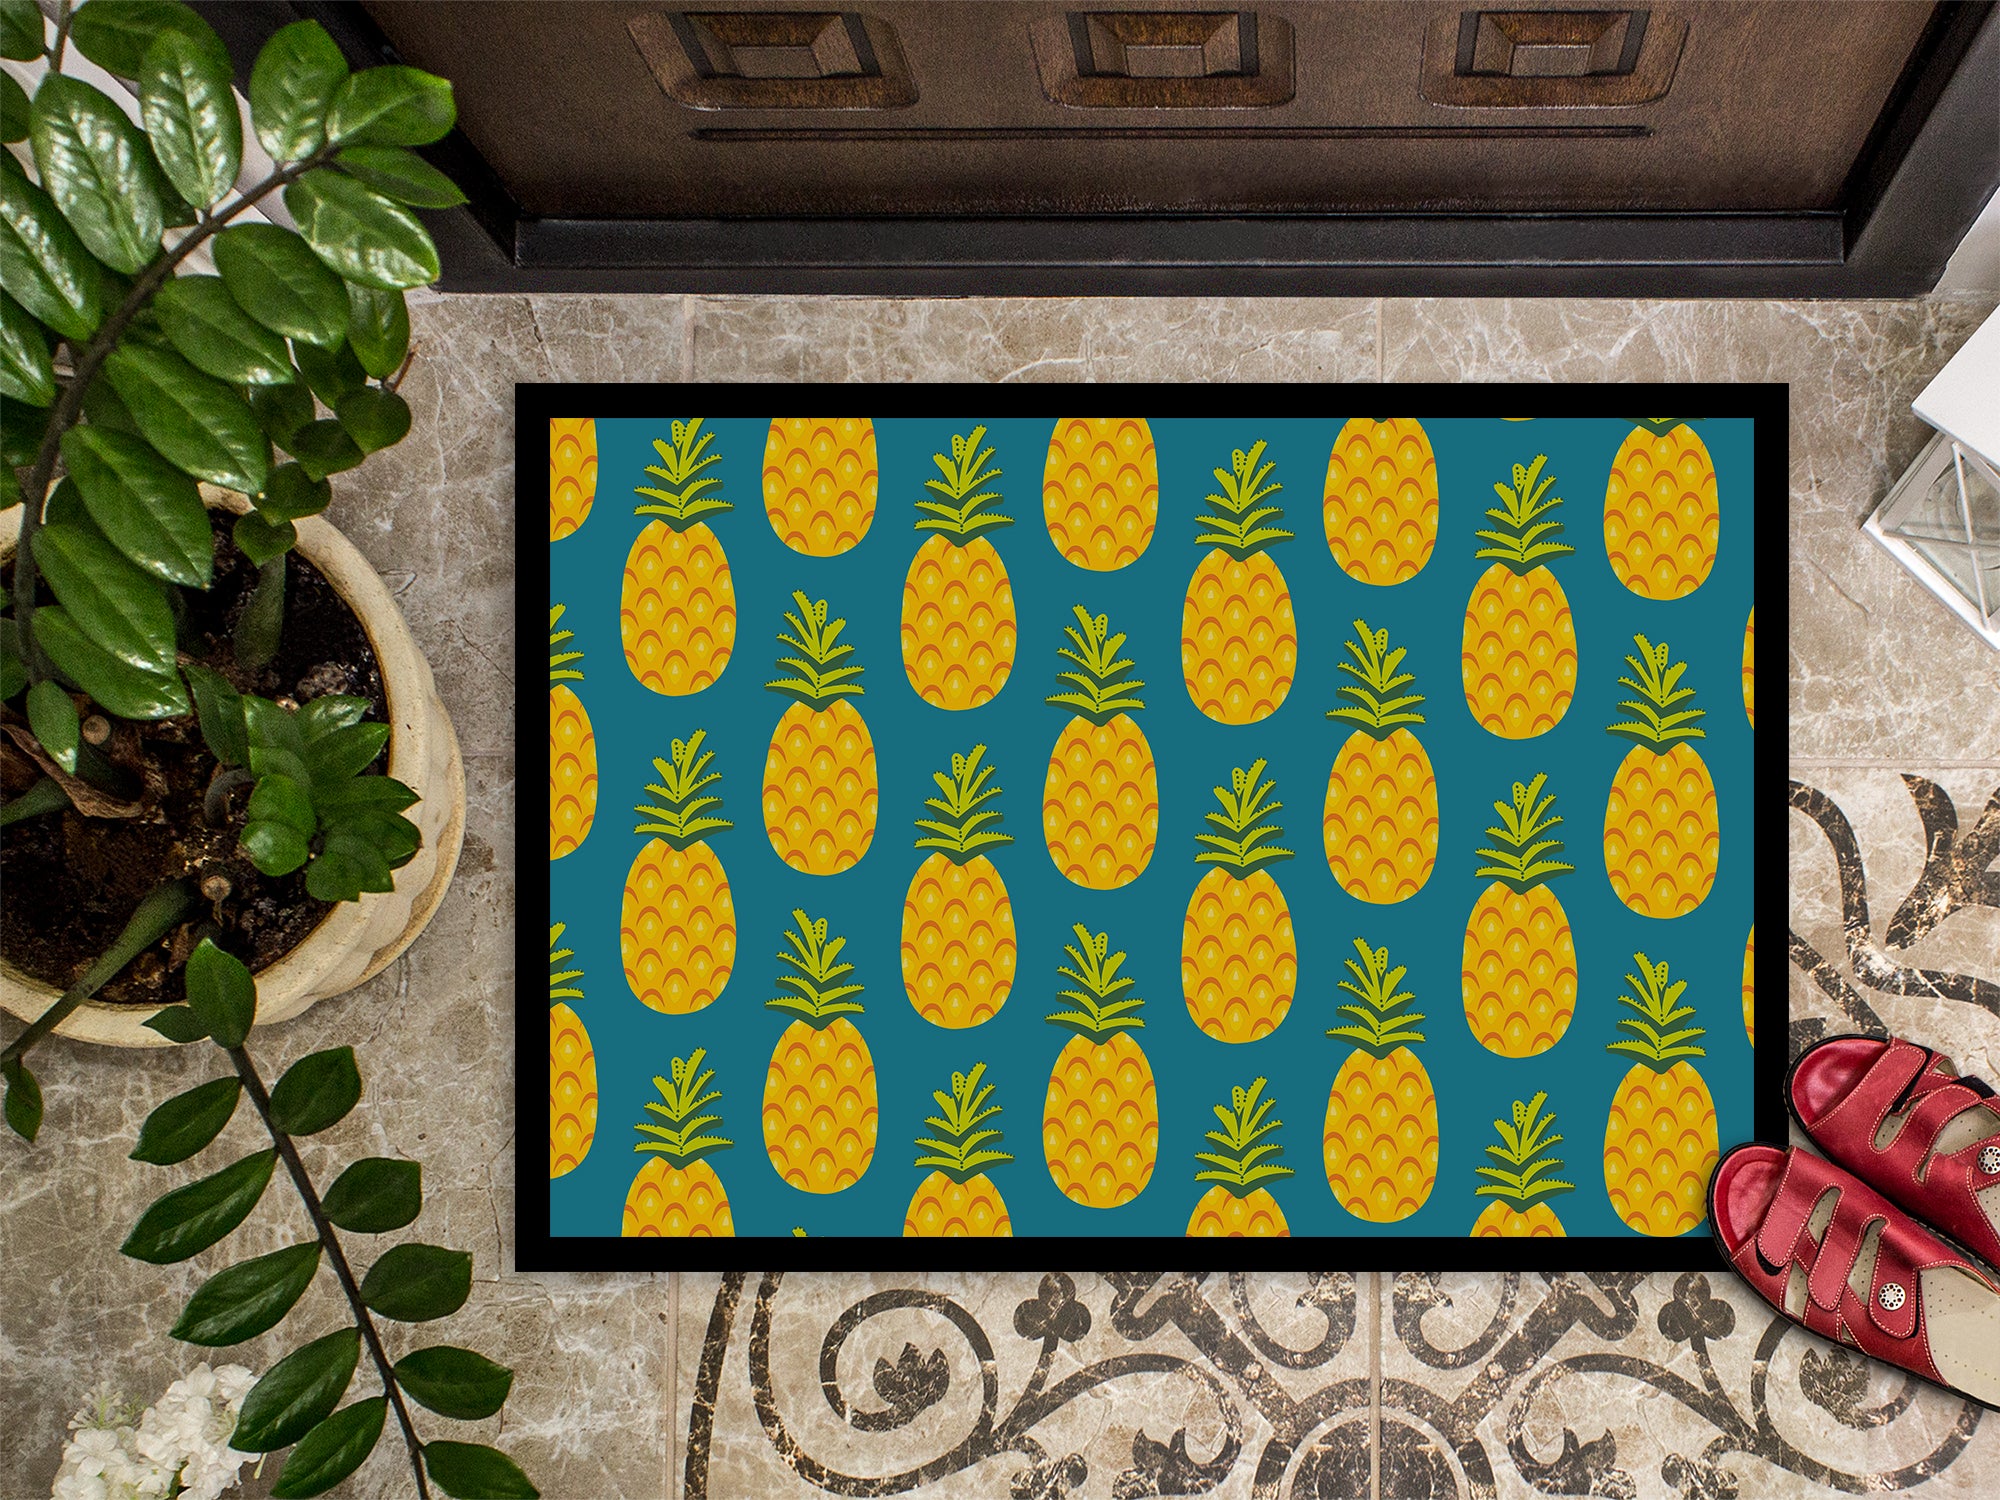 Pineapples on Teal Indoor or Outdoor Mat 18x27 BB5145MAT - the-store.com